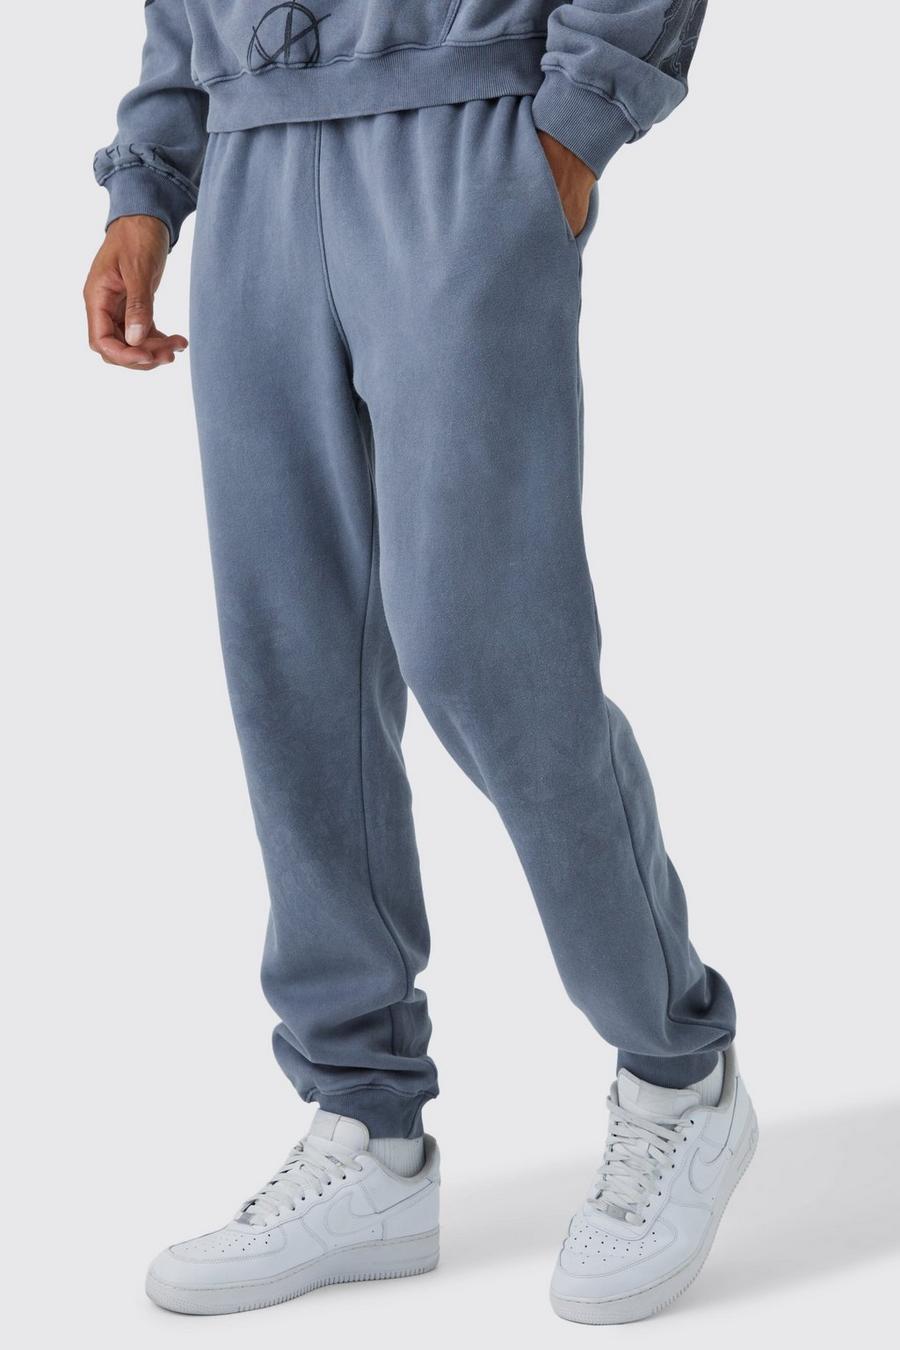 Charcoal gris Tall Core Acid Washed Jogger